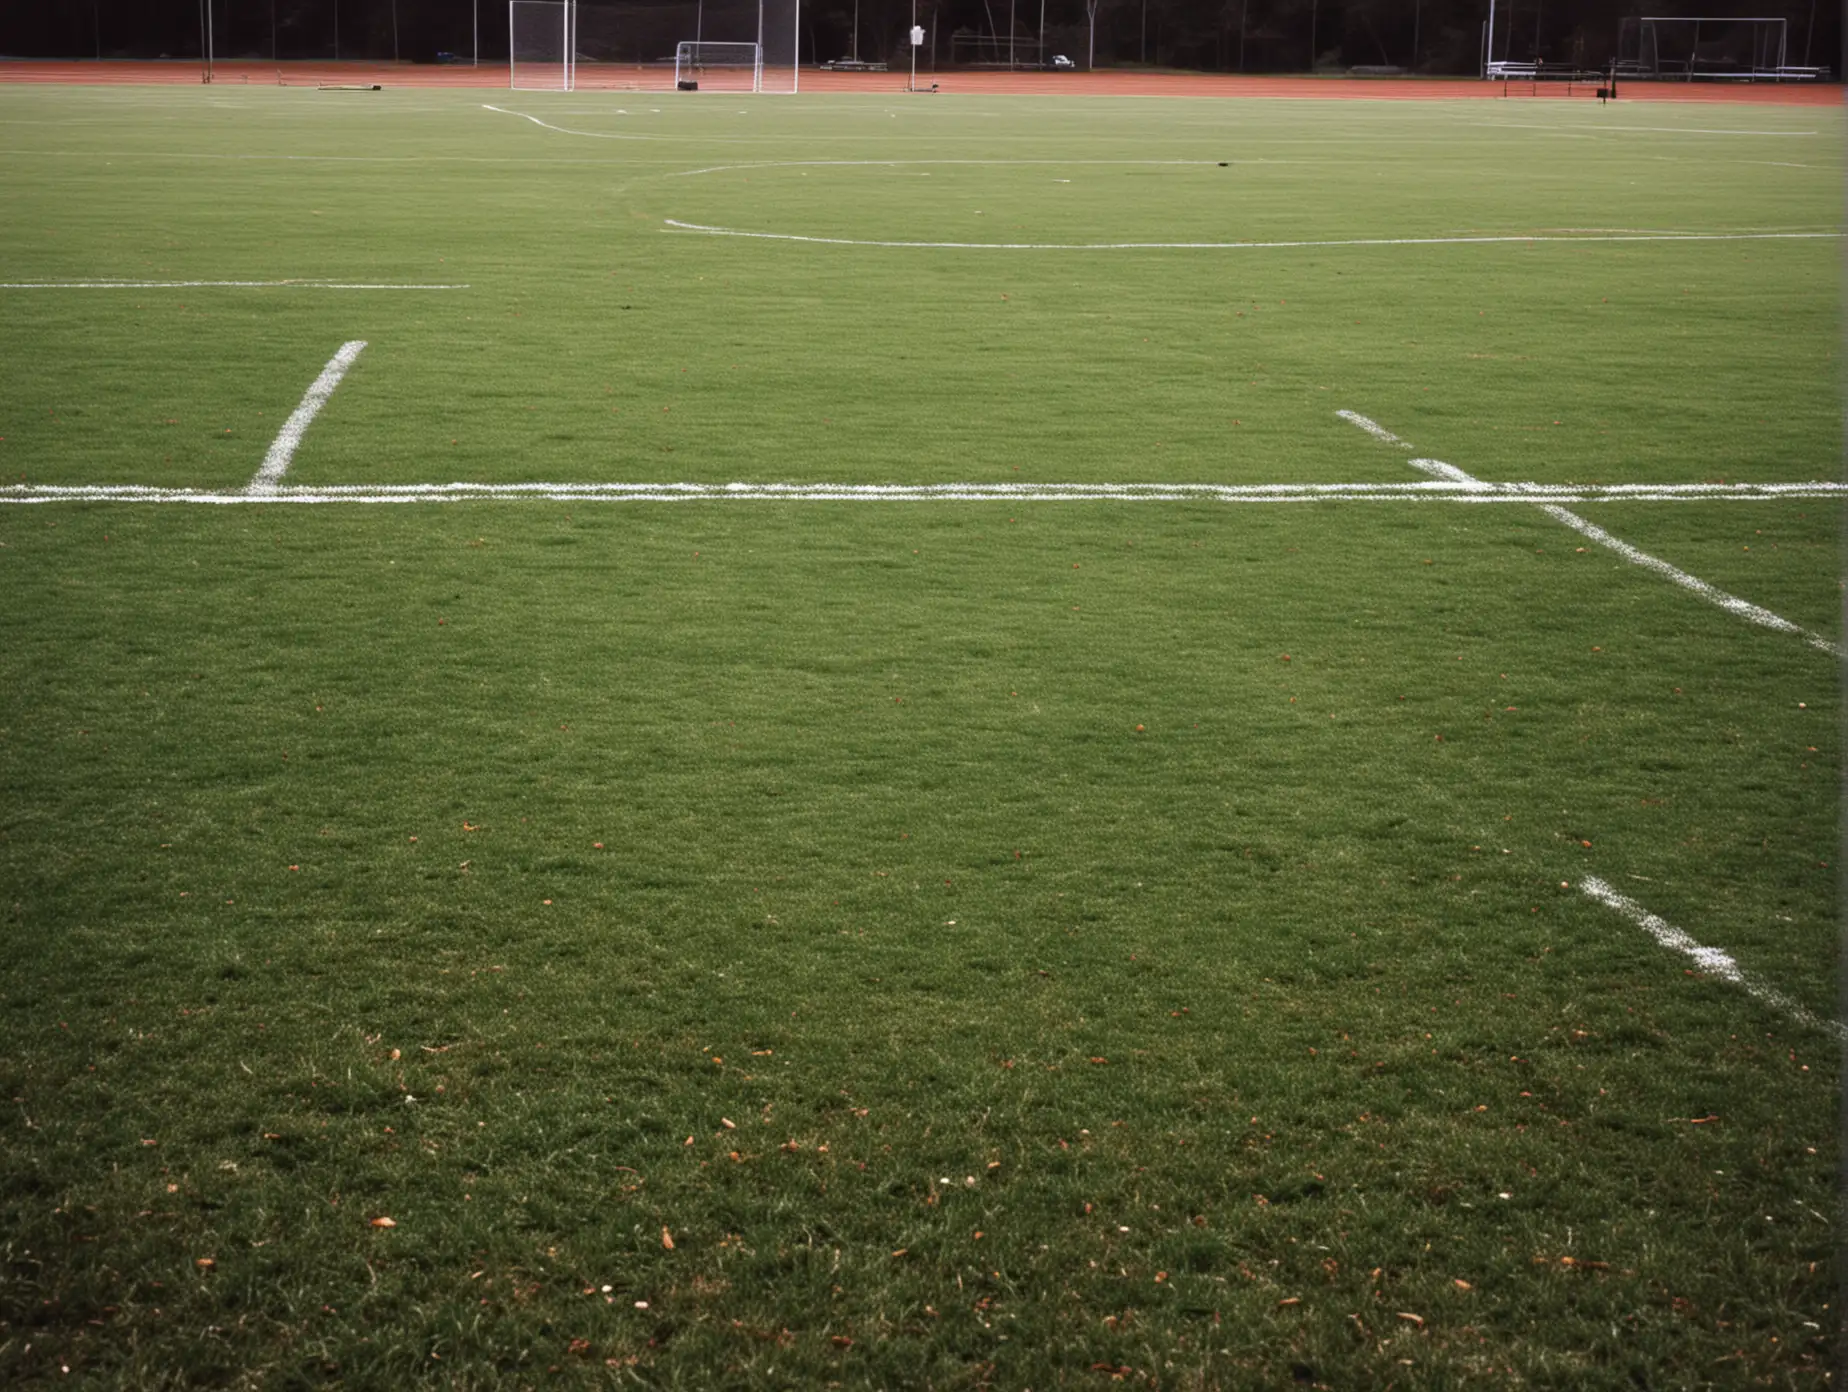 give me a photo quality image of a high school soccer field. Do not use any words or logos.  make it kodacolor 400 quality